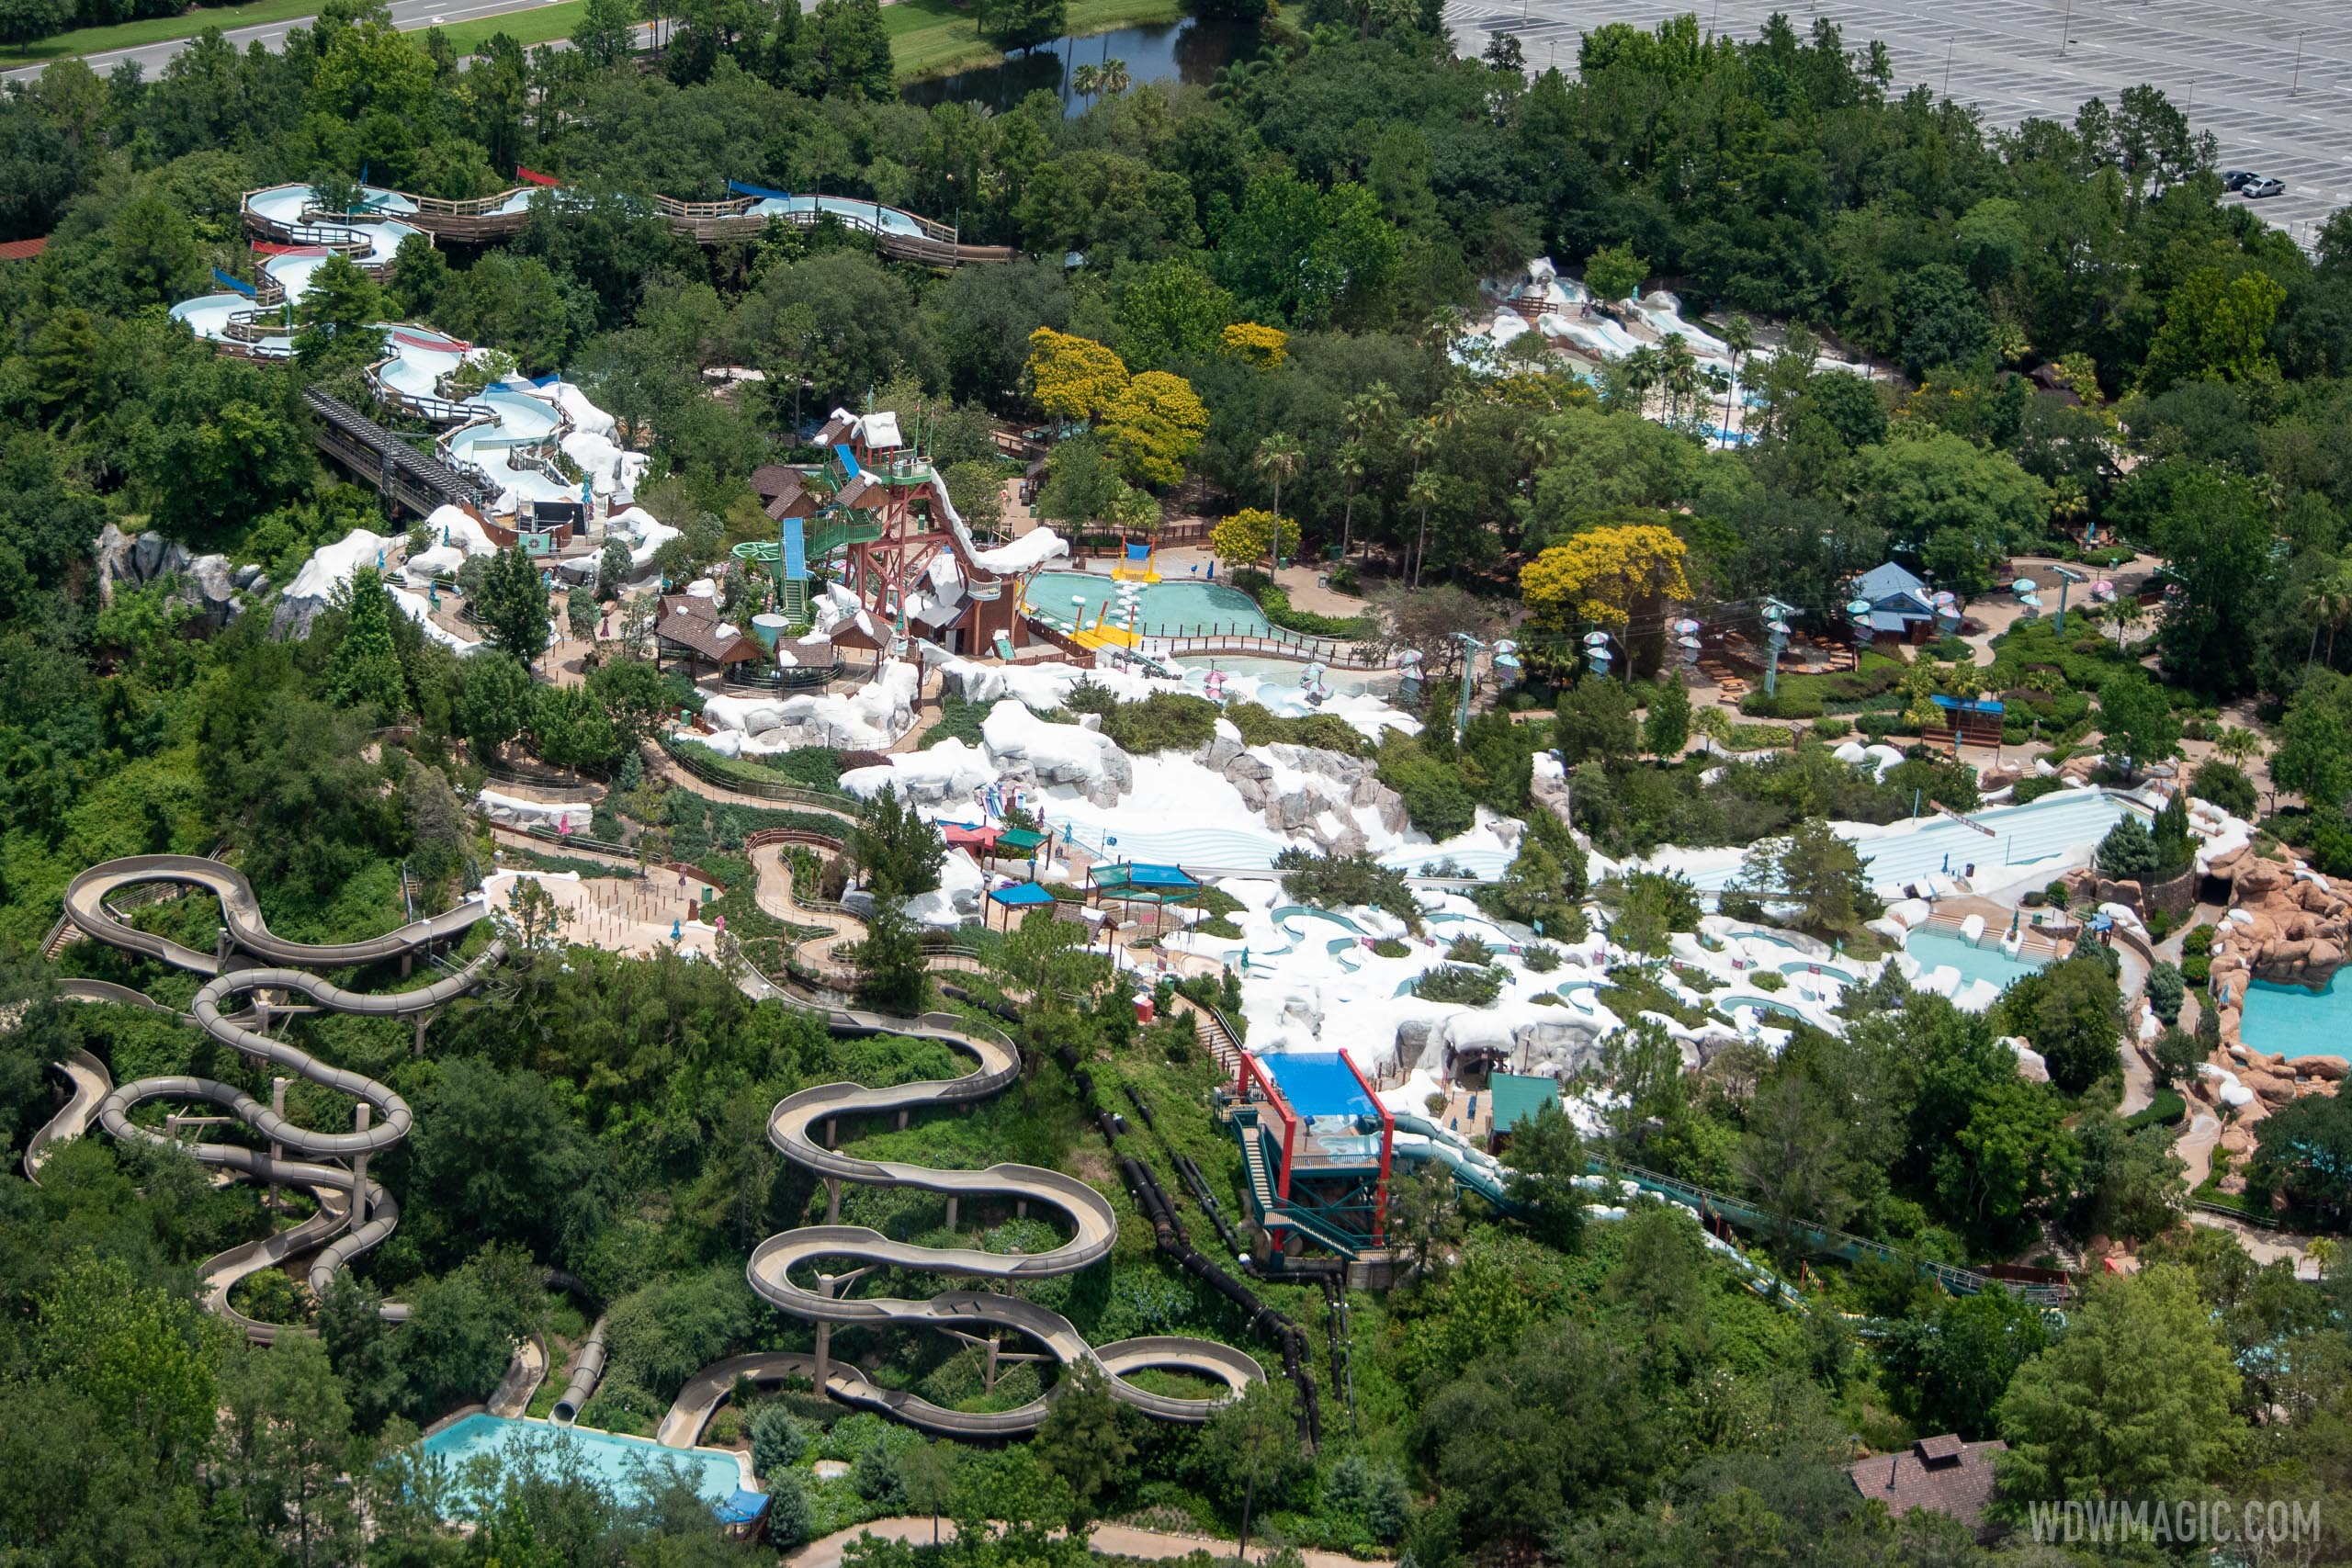 Blizzard Beach will be the first Disney water park to reopen in March 2021